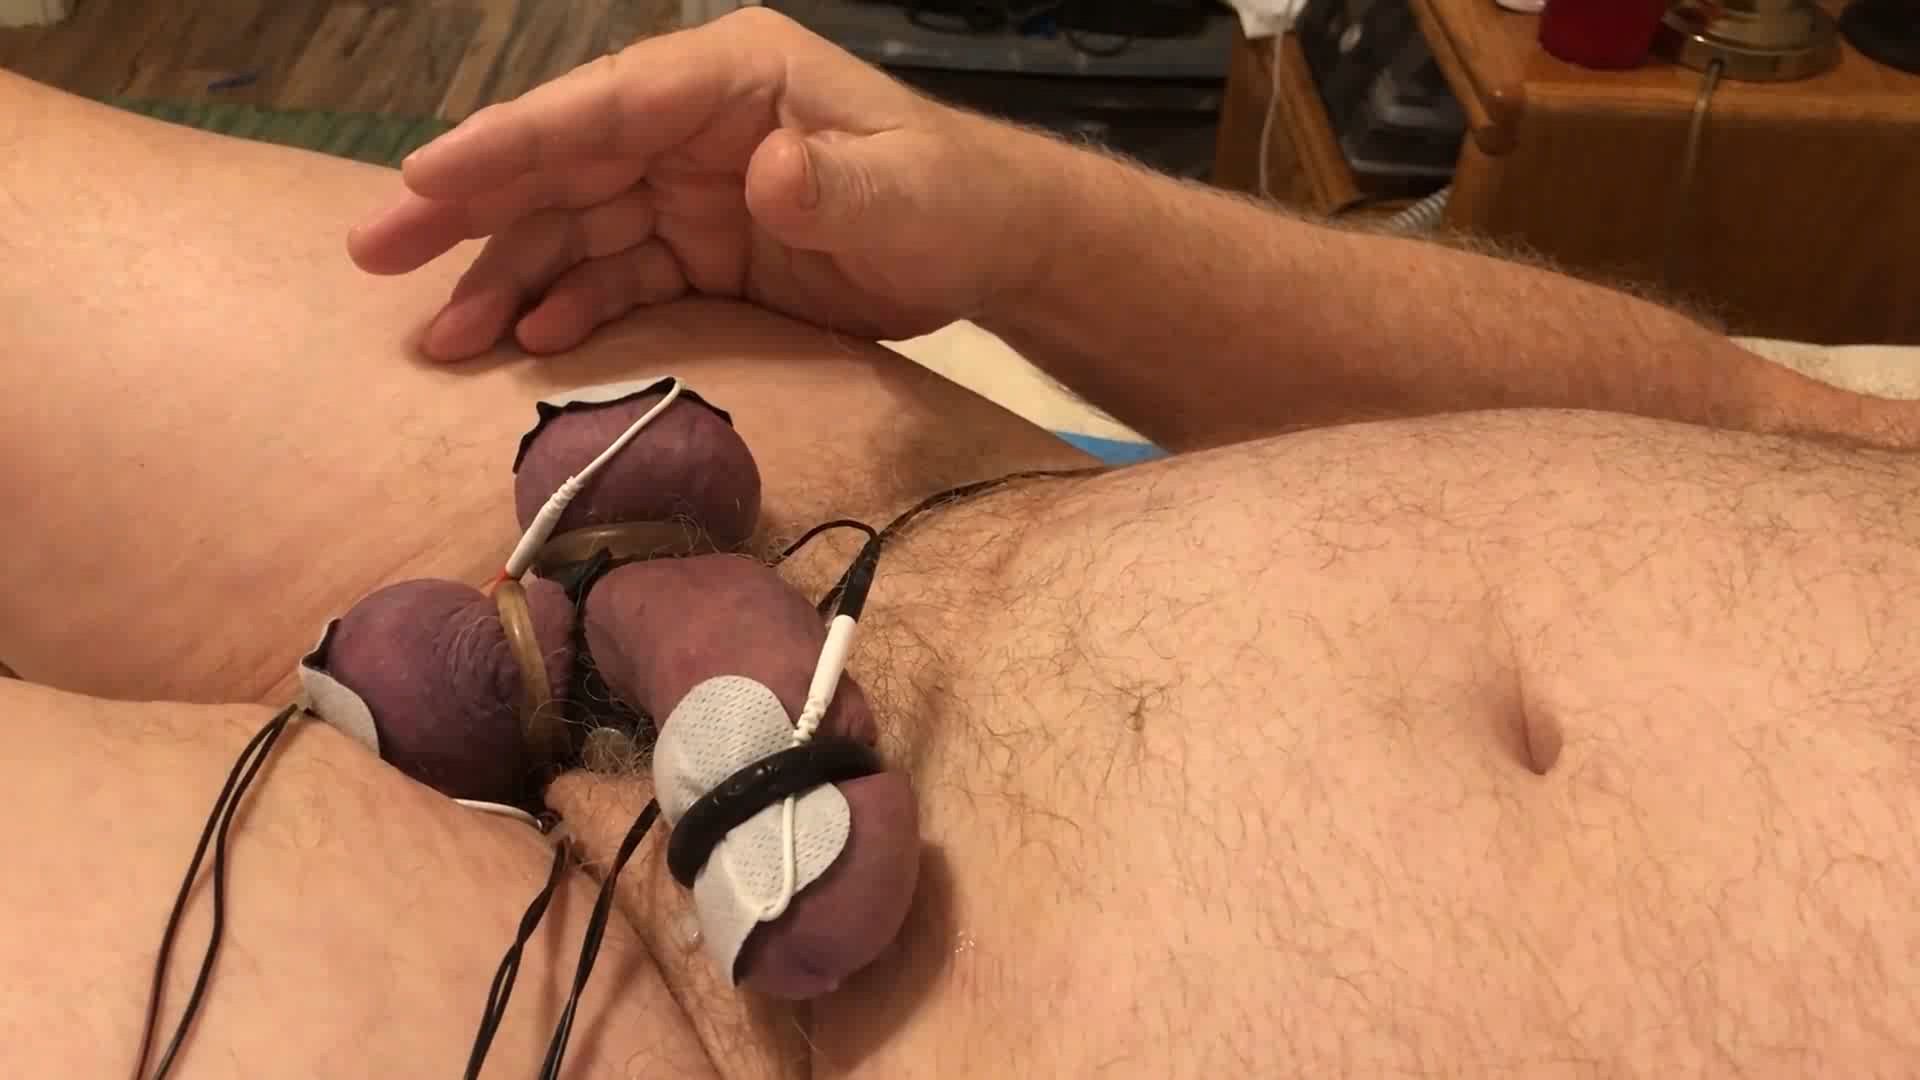 Cock twitches with estim pulse and precum flows as I slap an #54